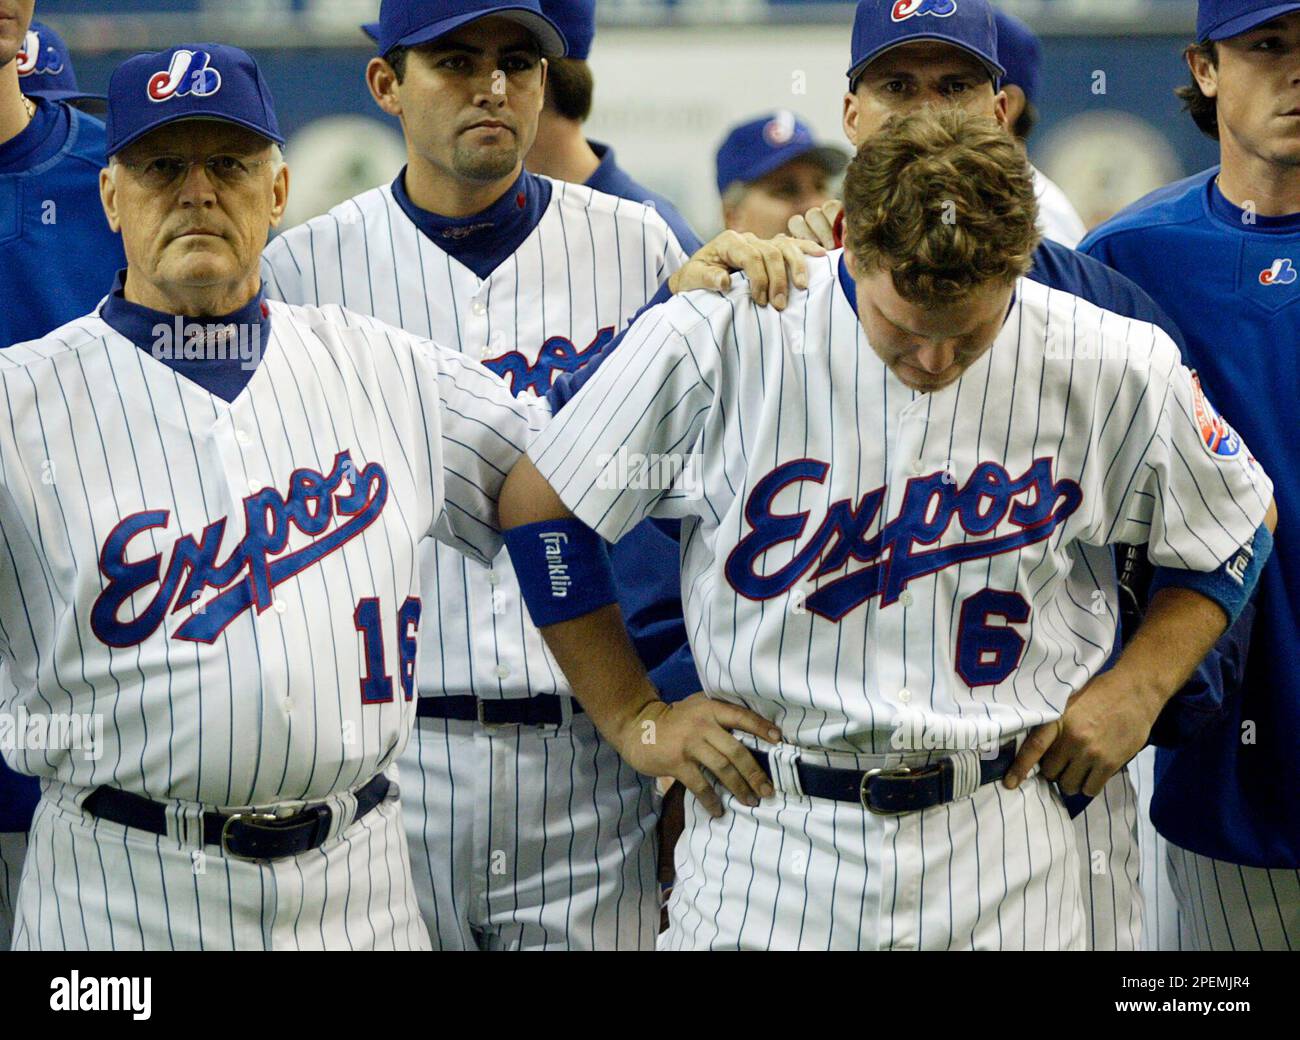 Montreal Expos former pitcher and now coach Claude Raymond, left, consoles  Brad Wilkerson as they say farewell to fans following the team's final home  game against the Florida Marlins in Montreal, Sept.